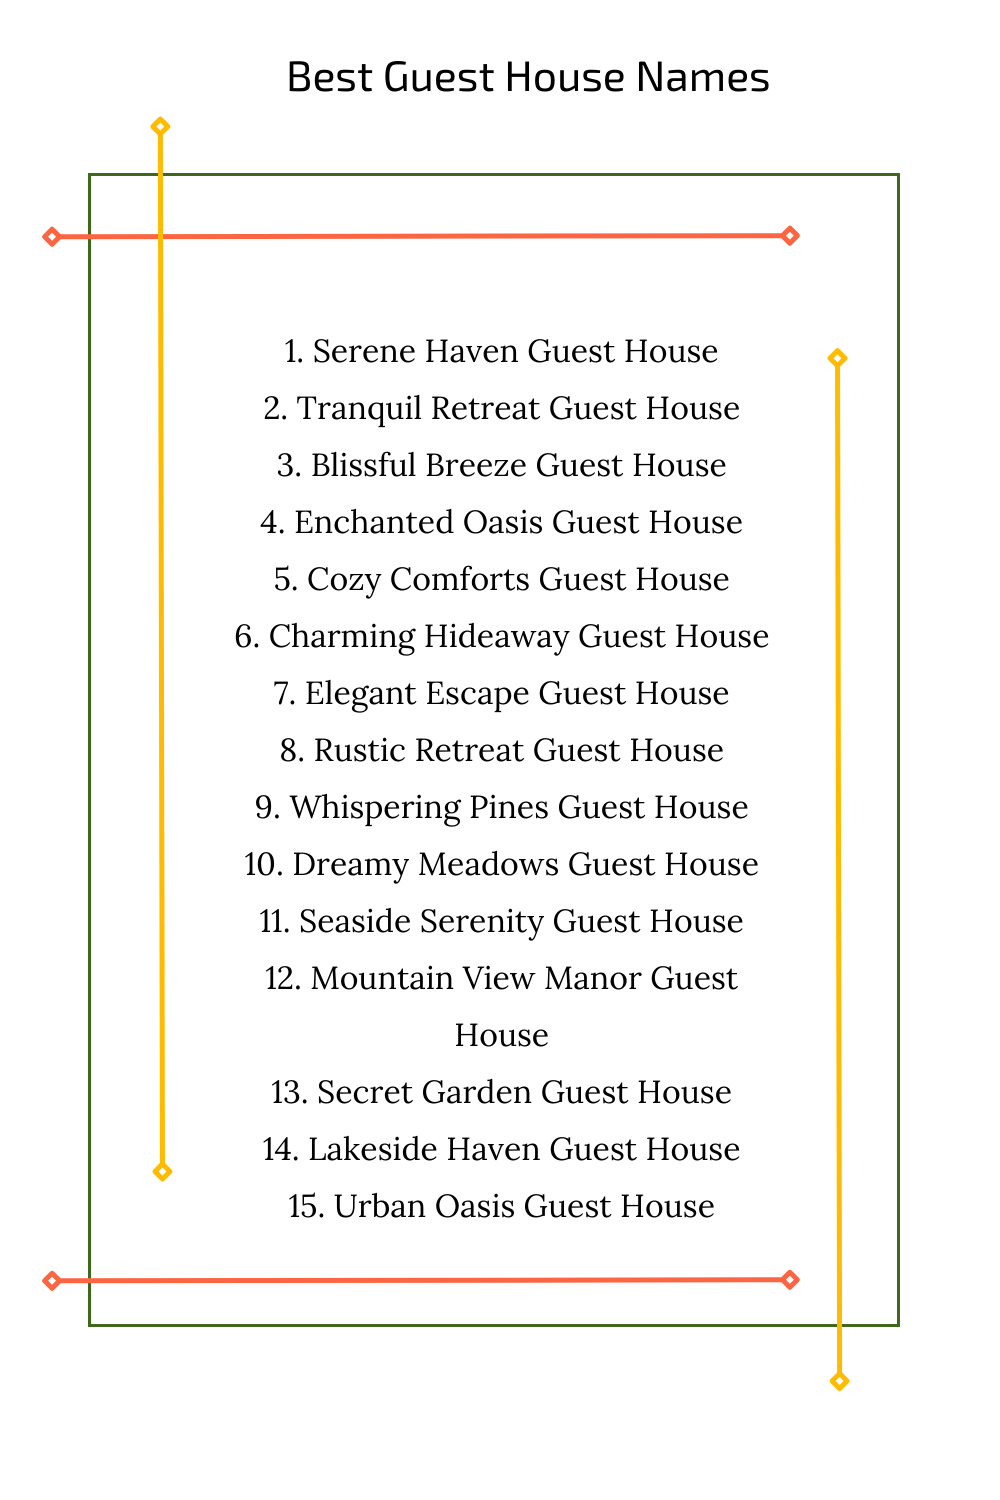 Best Guest House Names